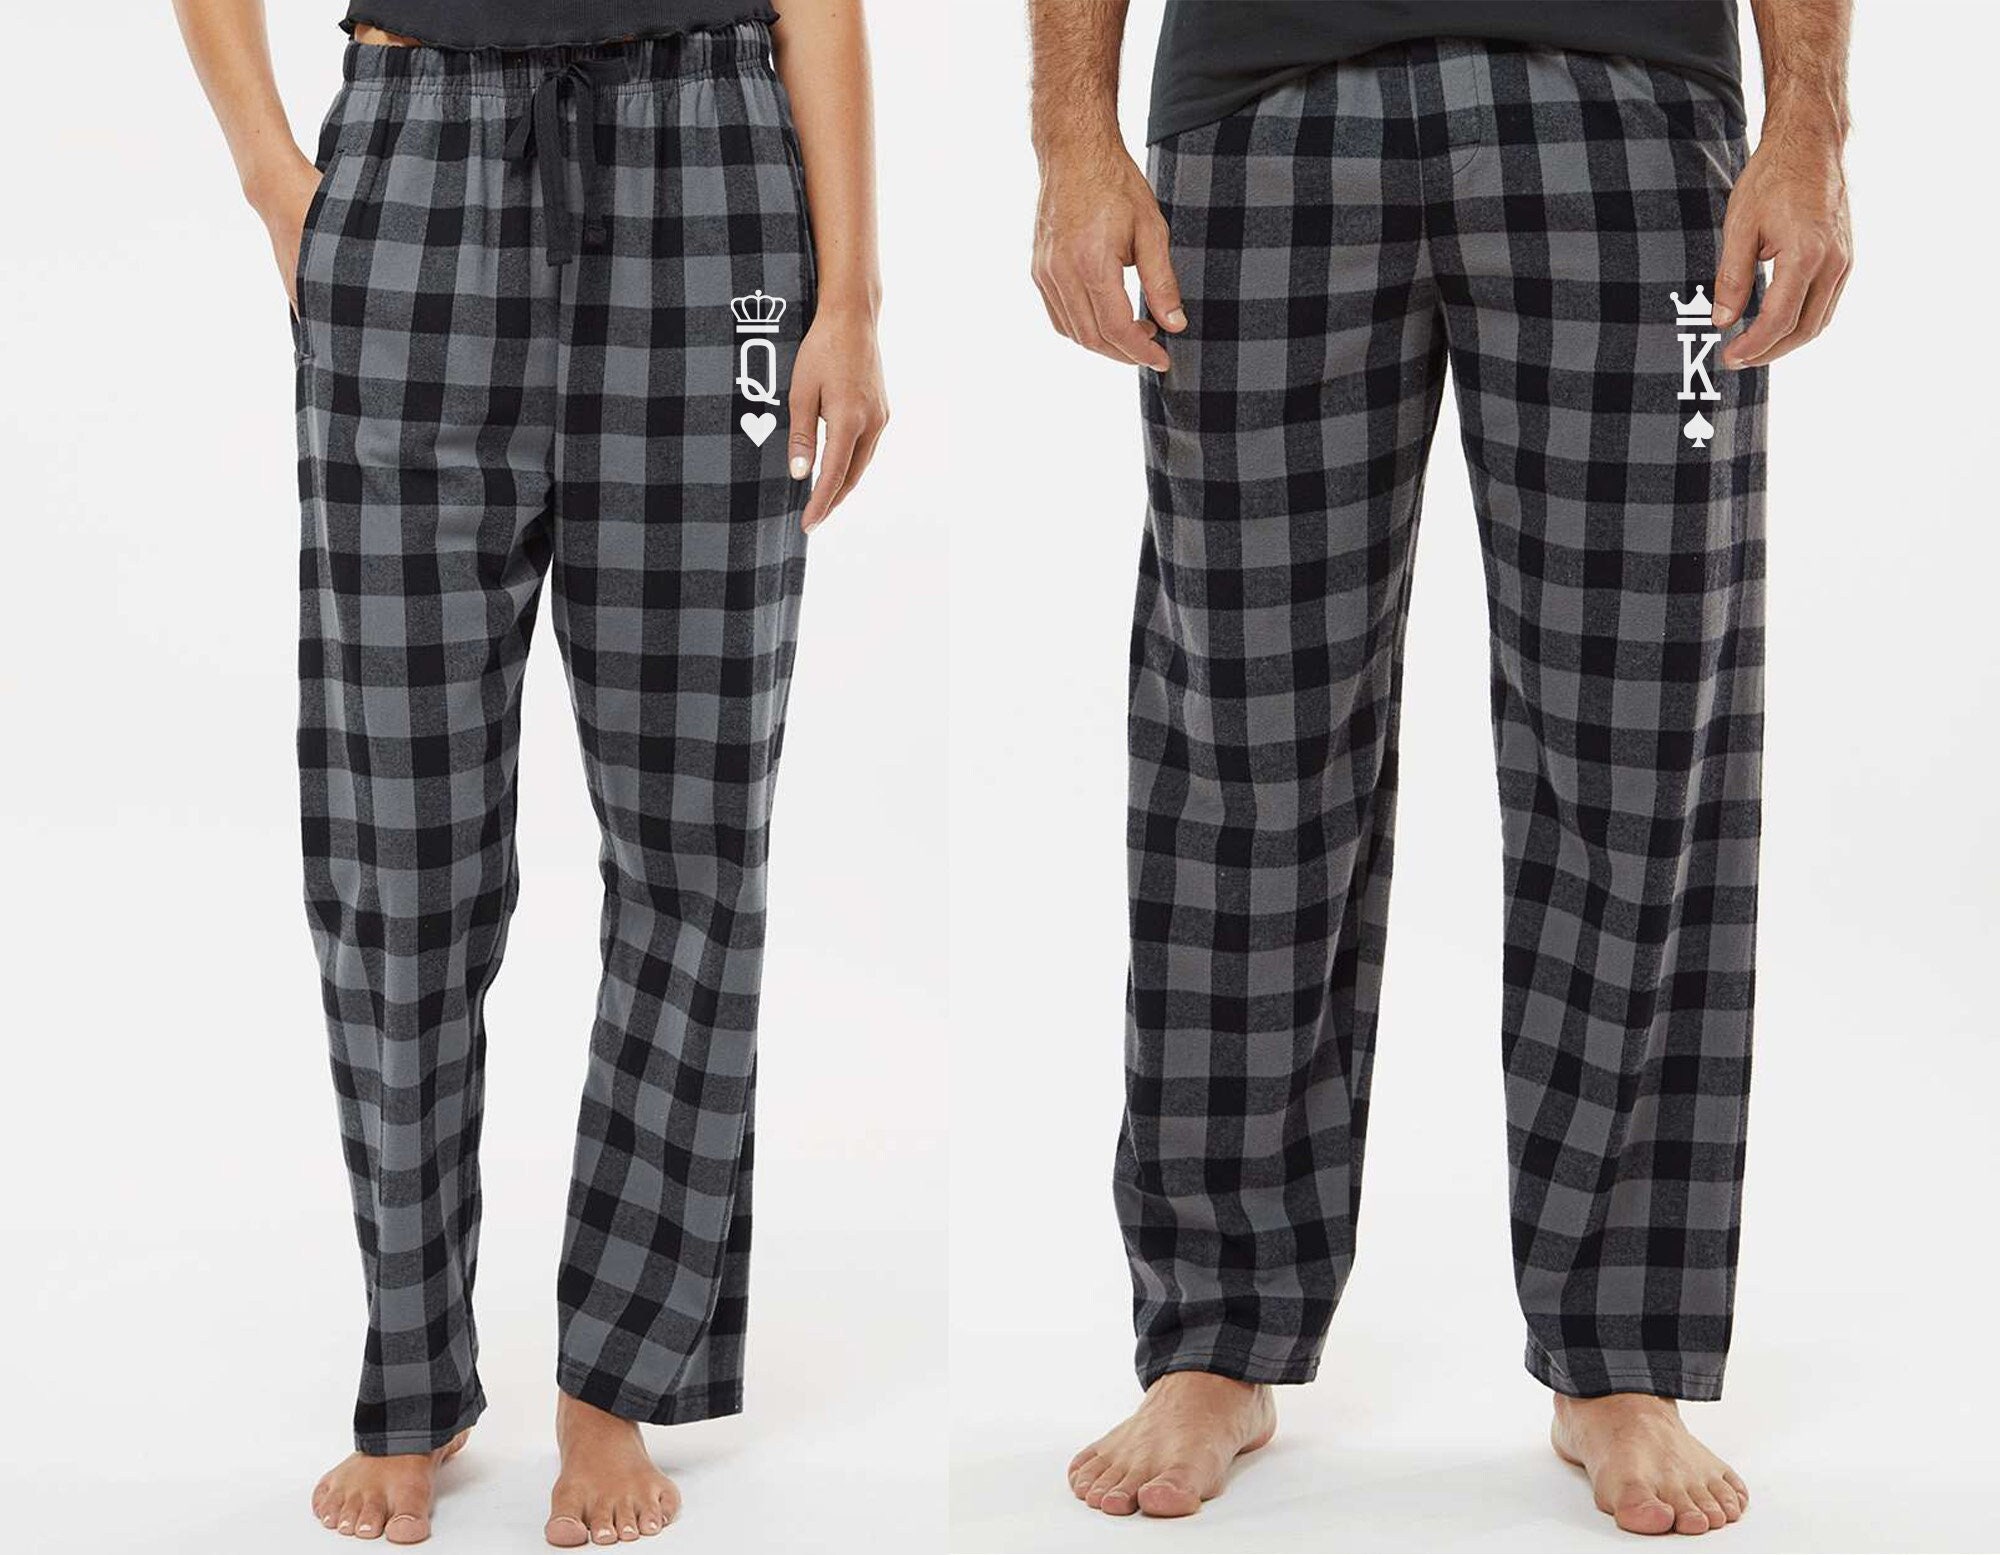 King & Queen Matching Couple Pajamas, Gift for Him, Anniversary